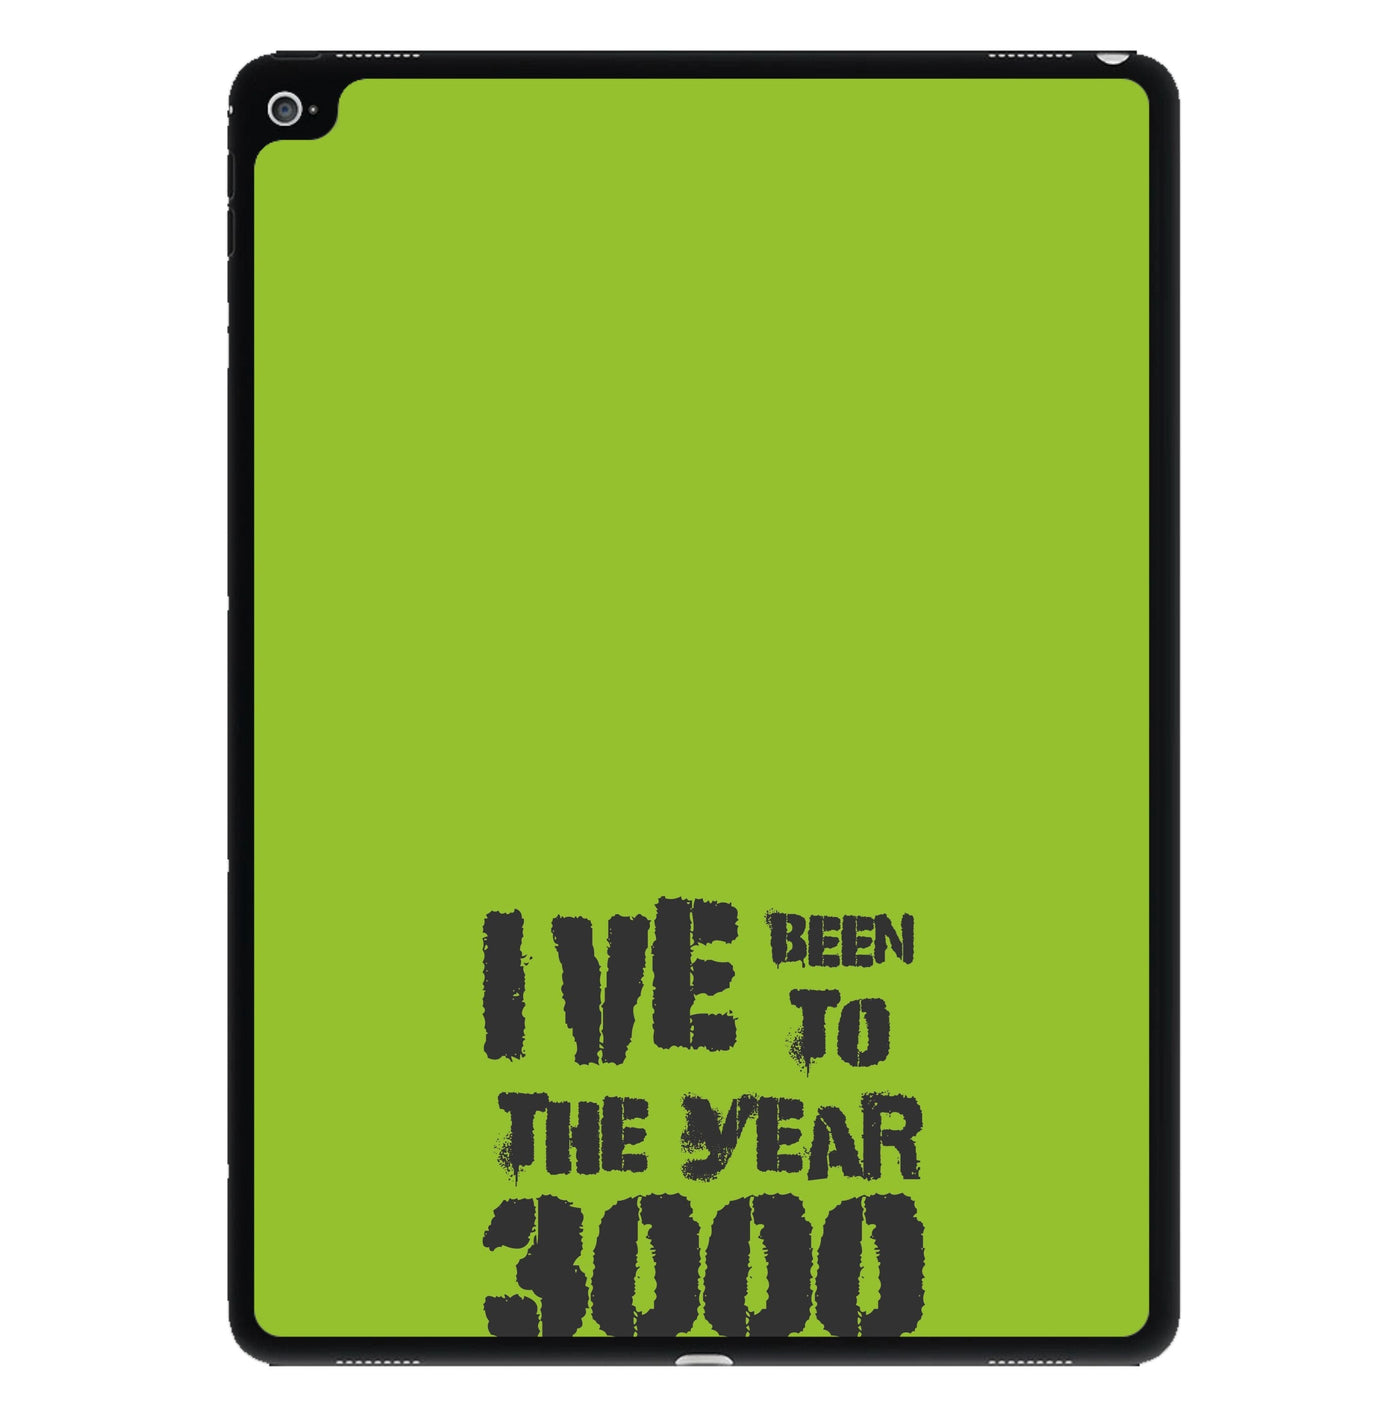 I've Been To The Year 3000 - Busted iPad Case